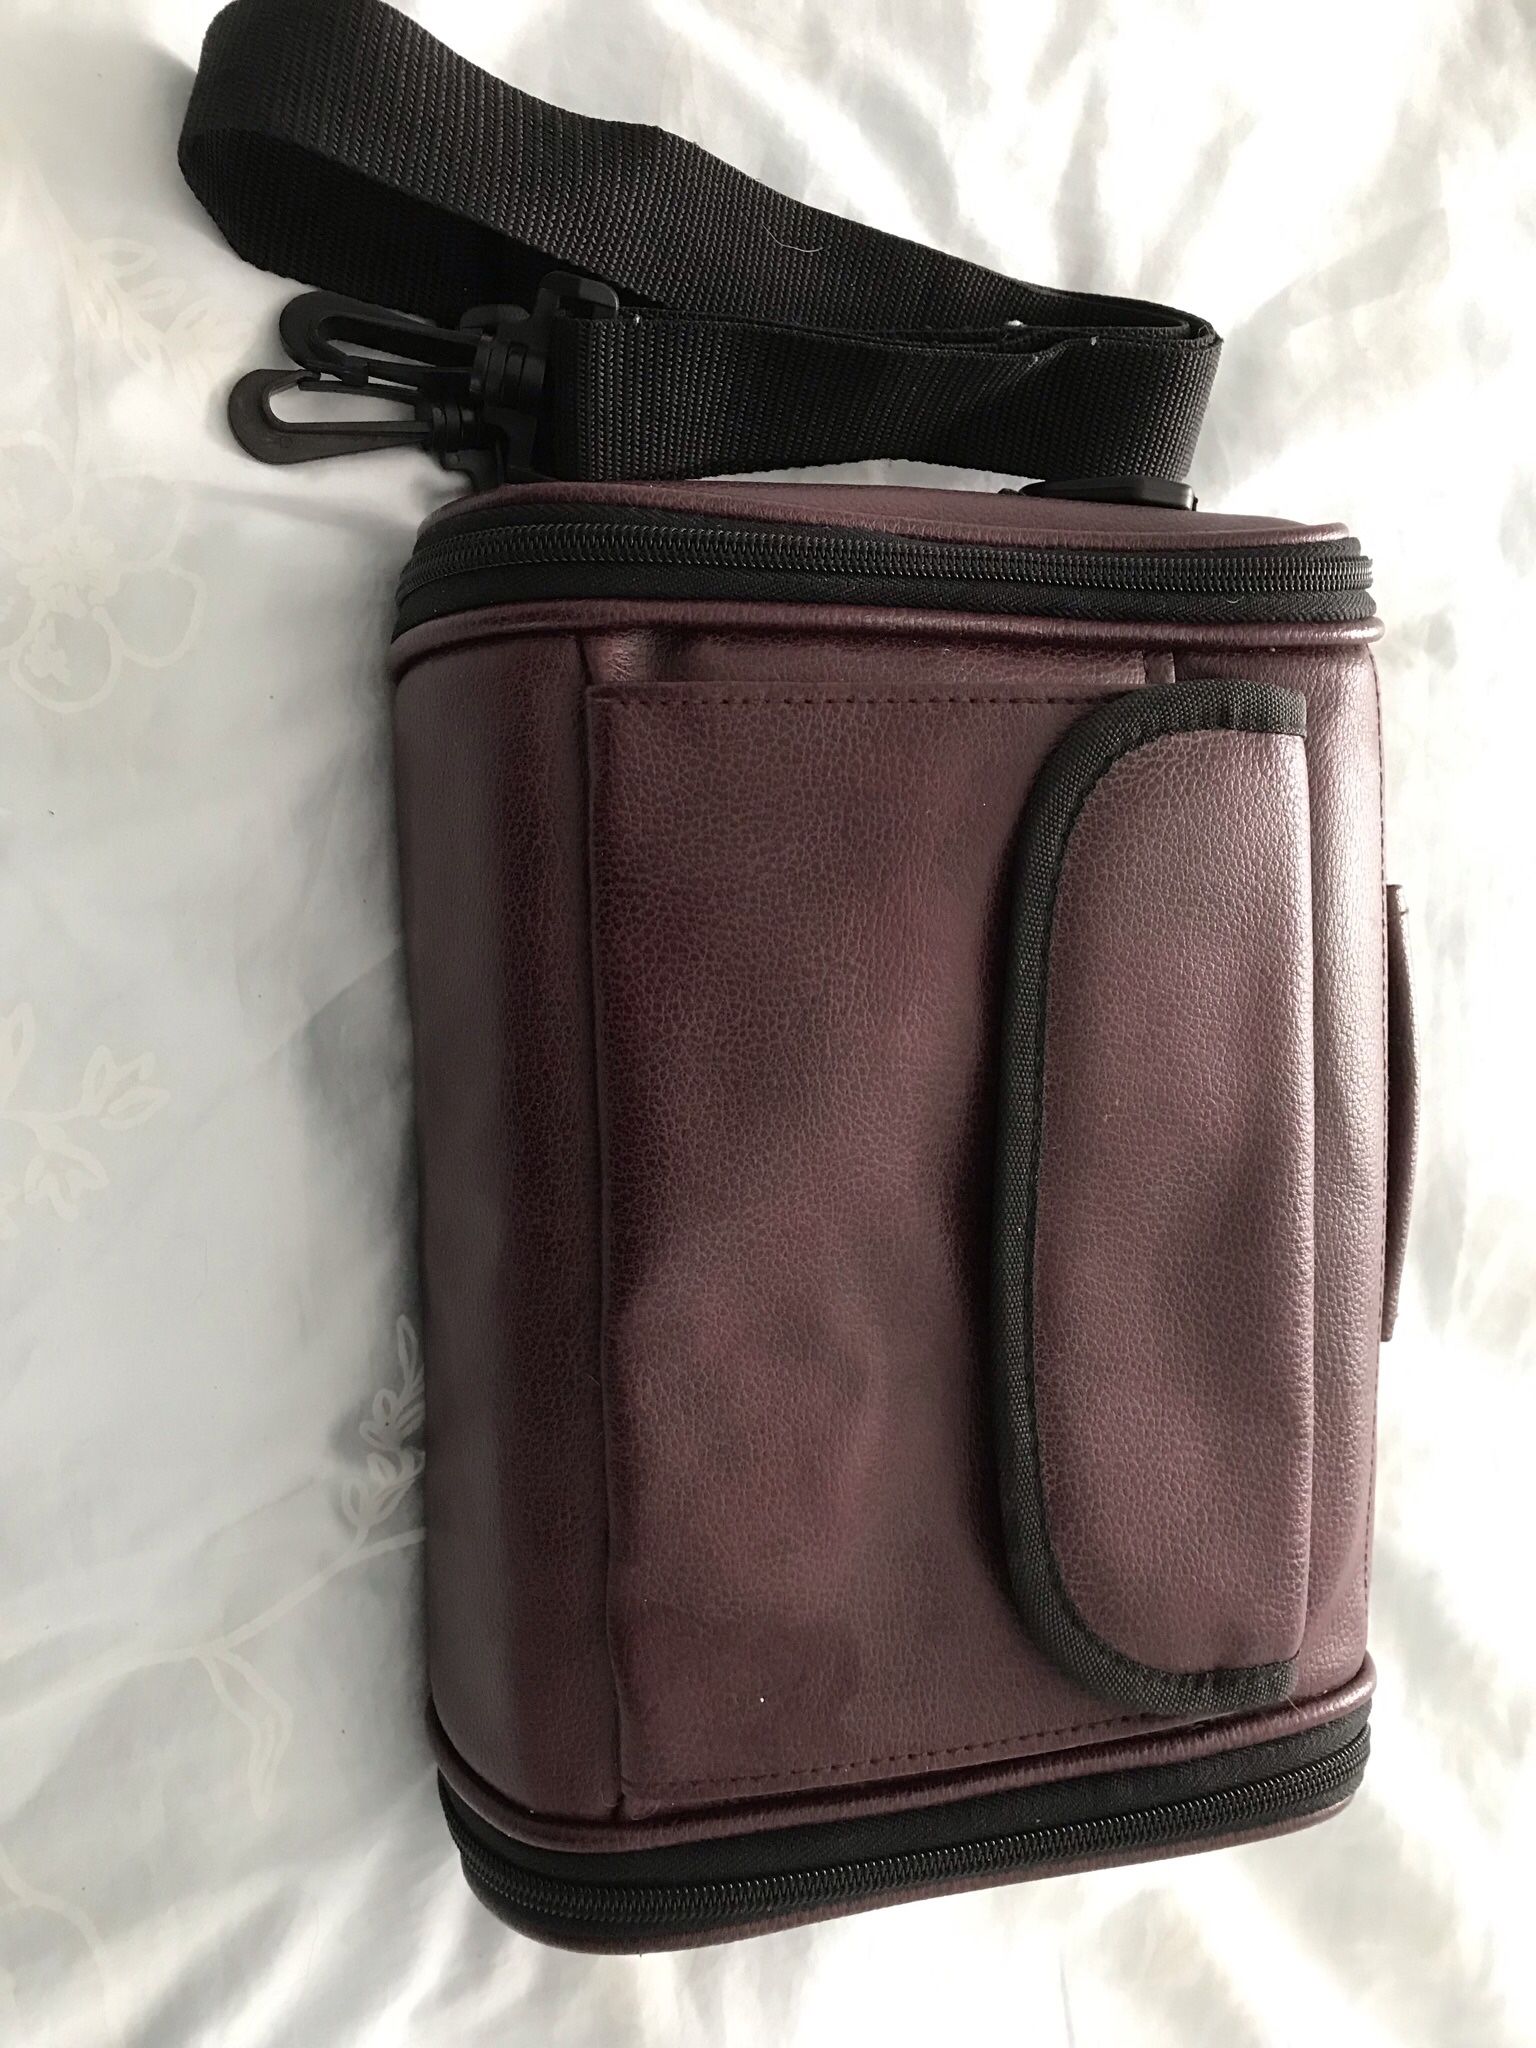 ALL PURPOSE CARRYING CASE